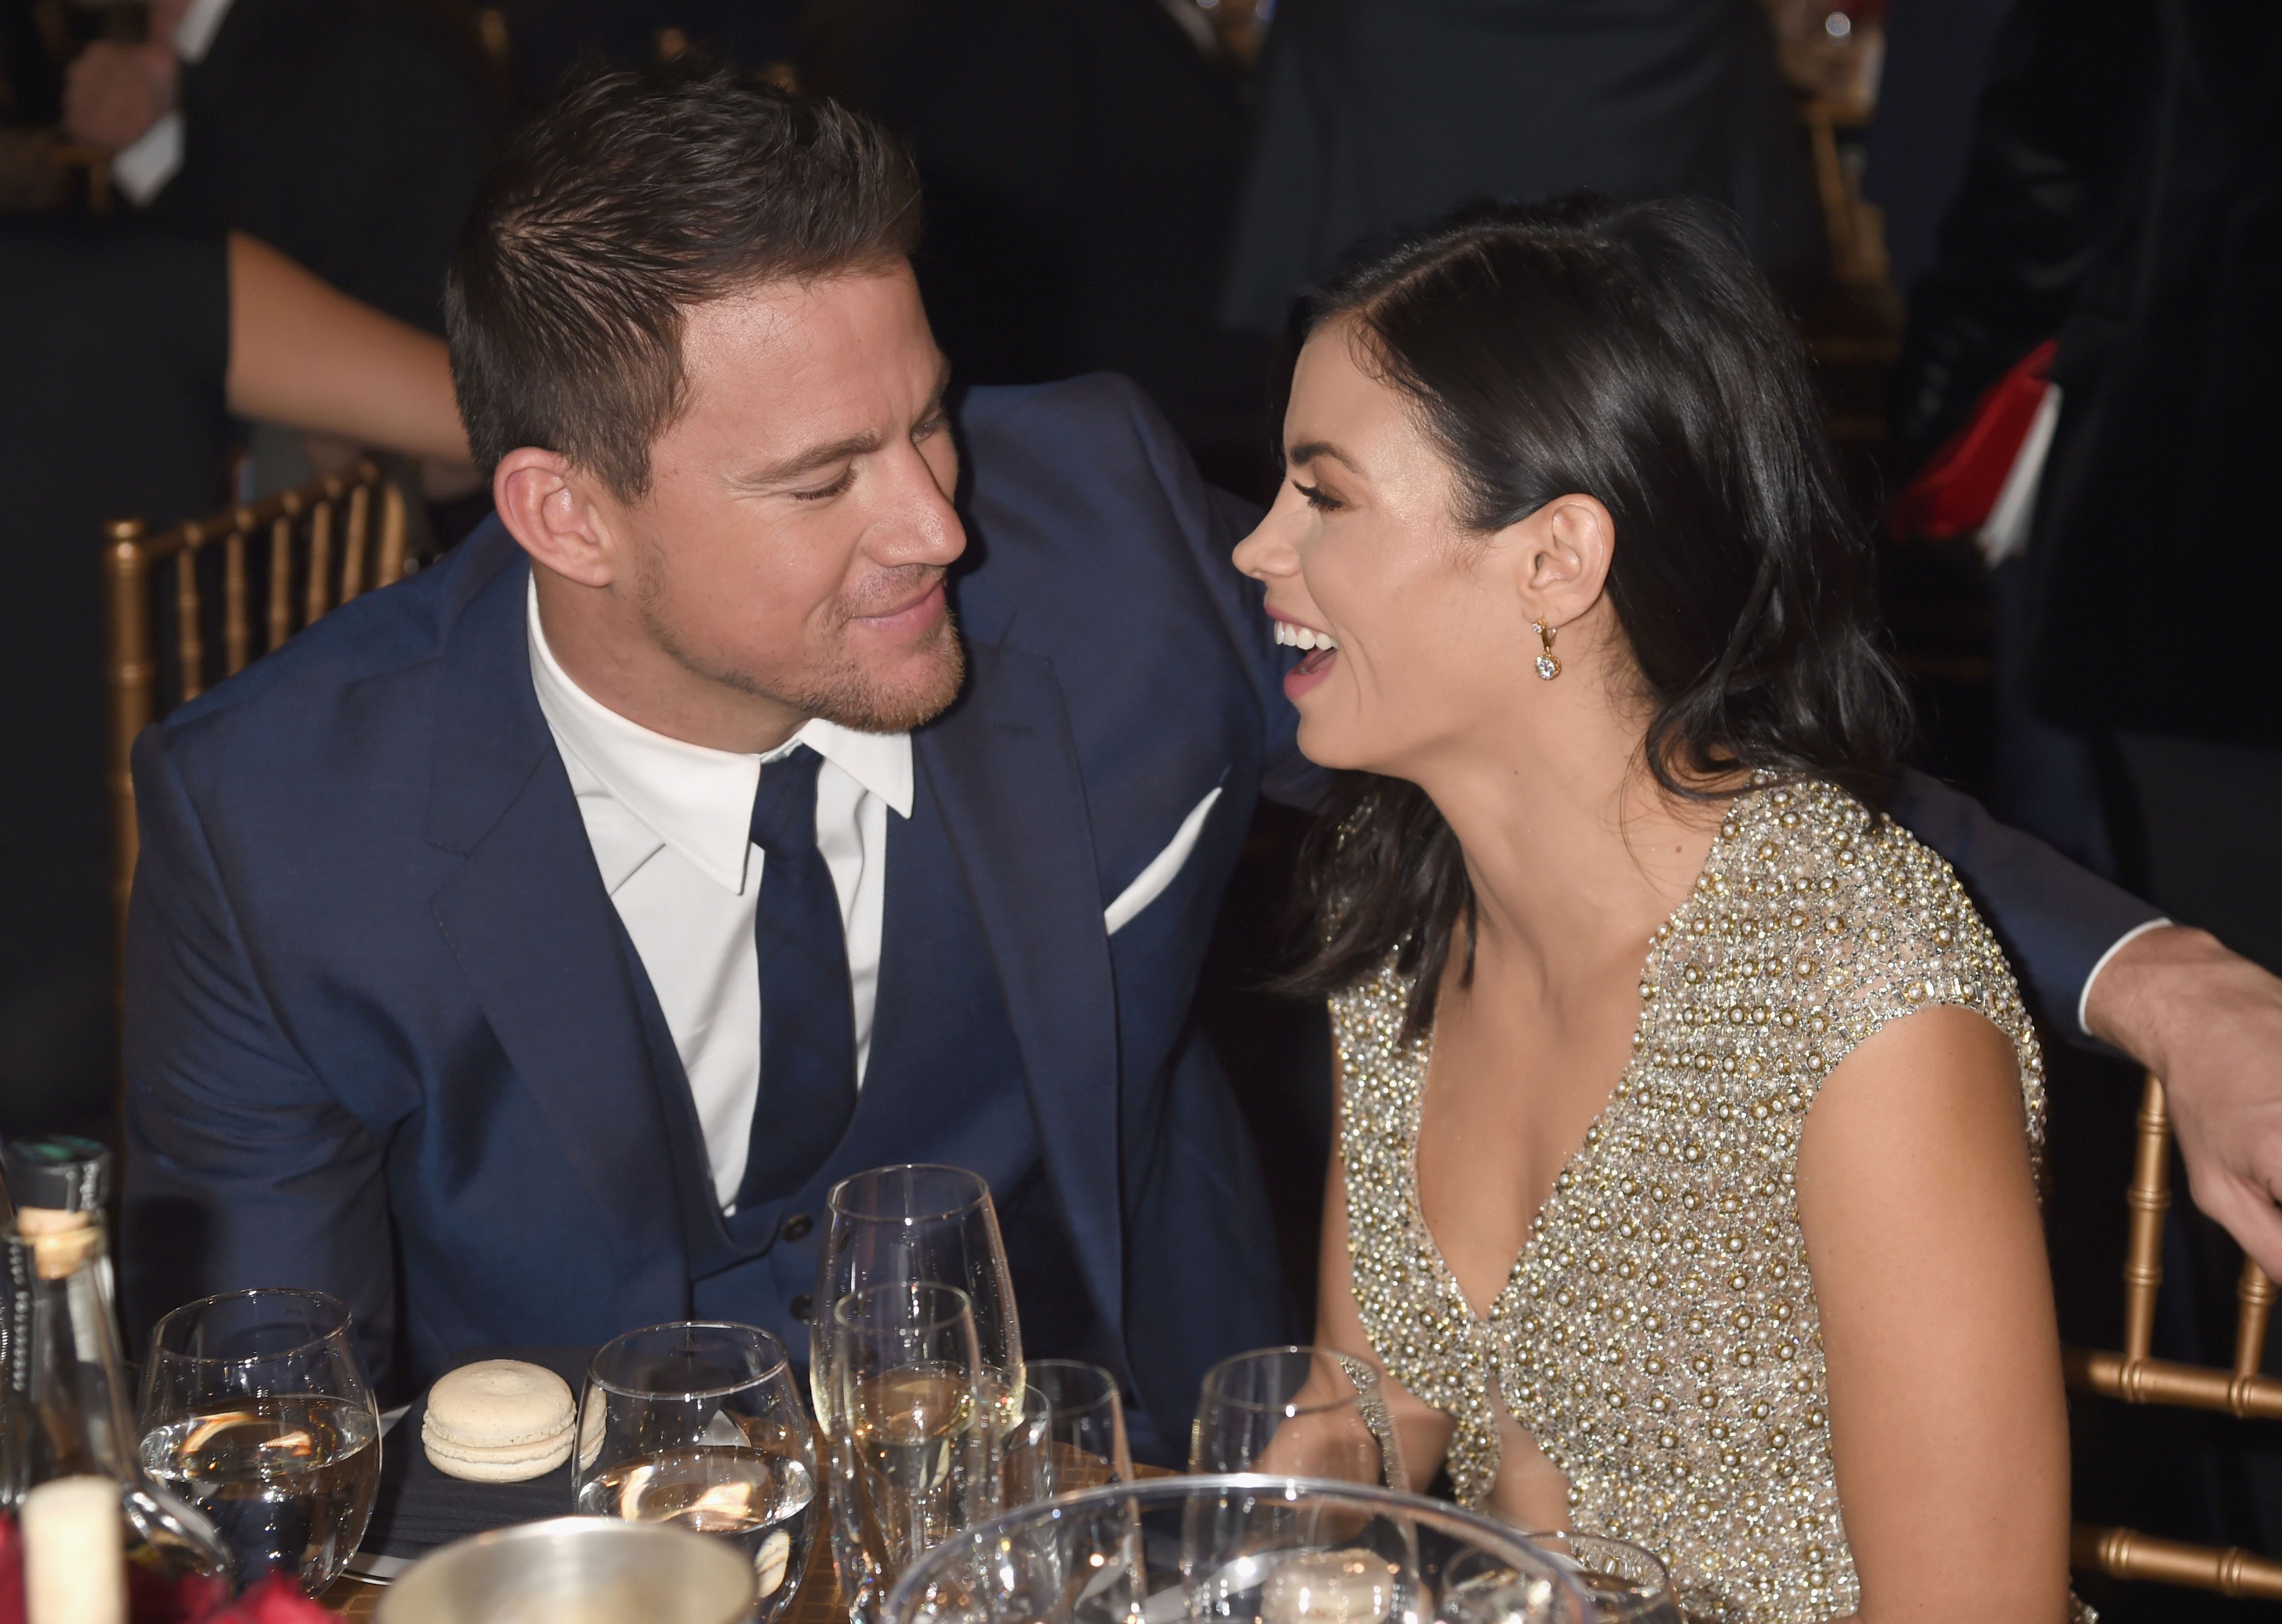 Why Channing Tatum and Jenna Dewan's Marriage Failed According to Sources -  Reports of Reasons for Tatum Separation